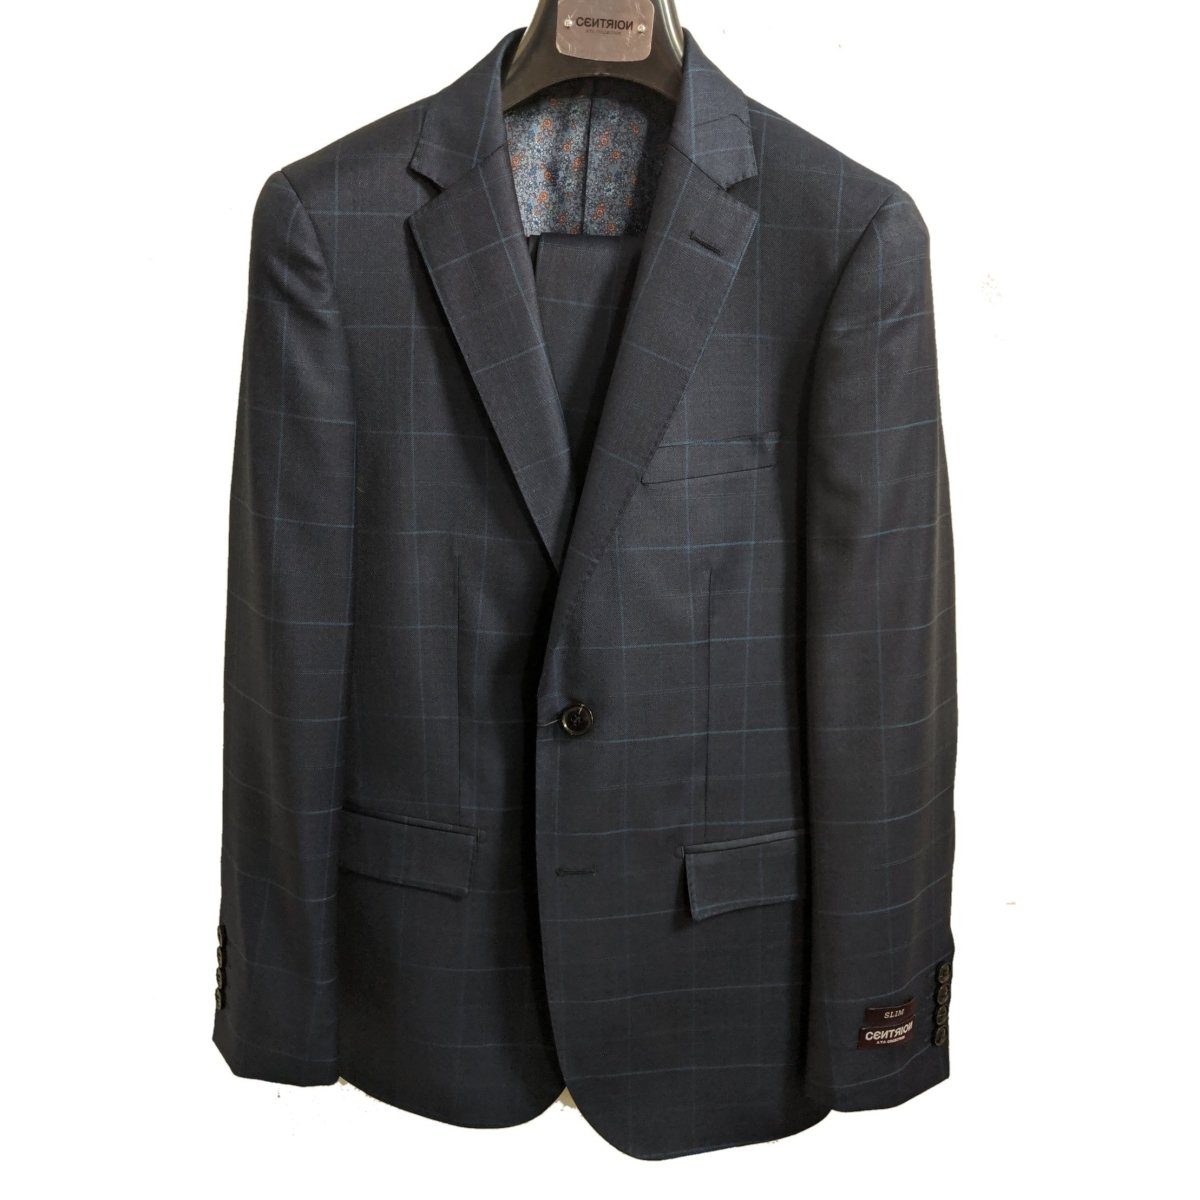 T.O. Collection Boys Centrion Slim Fit Blue Check Wool Suit 10015 Suits (Boys) T.O. Collection 